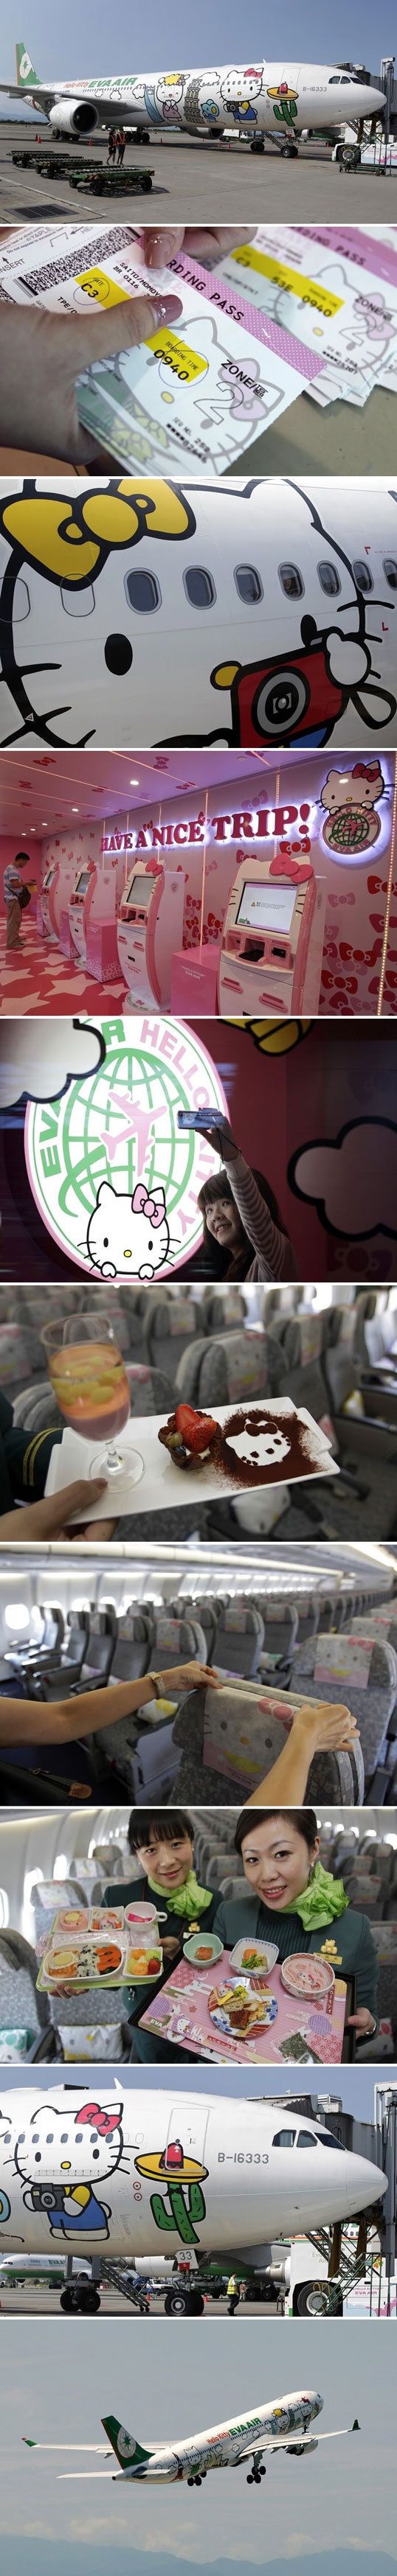 Hello Kitty Airline.